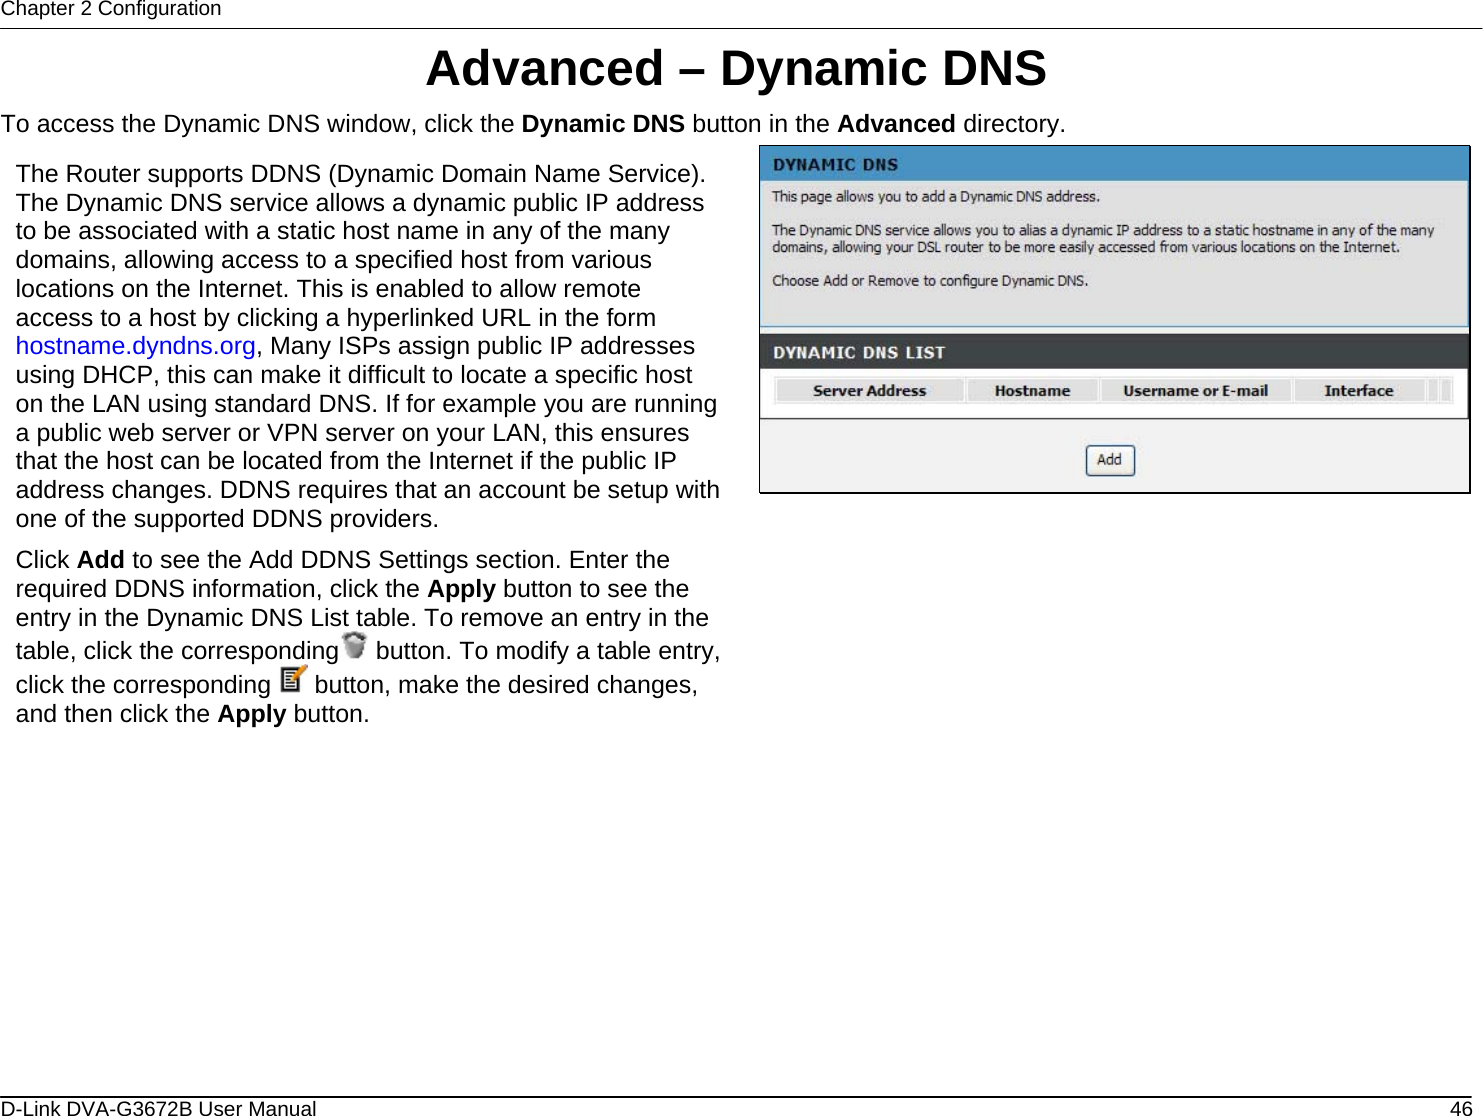 Chapter 2 Configuration Advanced – Dynamic DNS To access the Dynamic DNS window, click the Dynamic DNS button in the Advanced directory.  The Router supports DDNS (Dynamic Domain Name Service). The Dynamic DNS service allows a dynamic public IP address to be associated with a static host name in any of the many domains, allowing access to a specified host from various locations on the Internet. This is enabled to allow remote access to a host by clicking a hyperlinked URL in the form hostname.dyndns.org, Many ISPs assign public IP addresses using DHCP, this can make it difficult to locate a specific host on the LAN using standard DNS. If for example you are running a public web server or VPN server on your LAN, this ensures that the host can be located from the Internet if the public IP address changes. DDNS requires that an account be setup with one of the supported DDNS providers. Click Add to see the Add DDNS Settings section. Enter the required DDNS information, click the Apply button to see the entry in the Dynamic DNS List table. To remove an entry in the table, click the corresponding  button. To modify a table entry, click the corresponding   button, make the desired changes, and then click the Apply button.                      D-Link DVA-G3672B User Manual  46